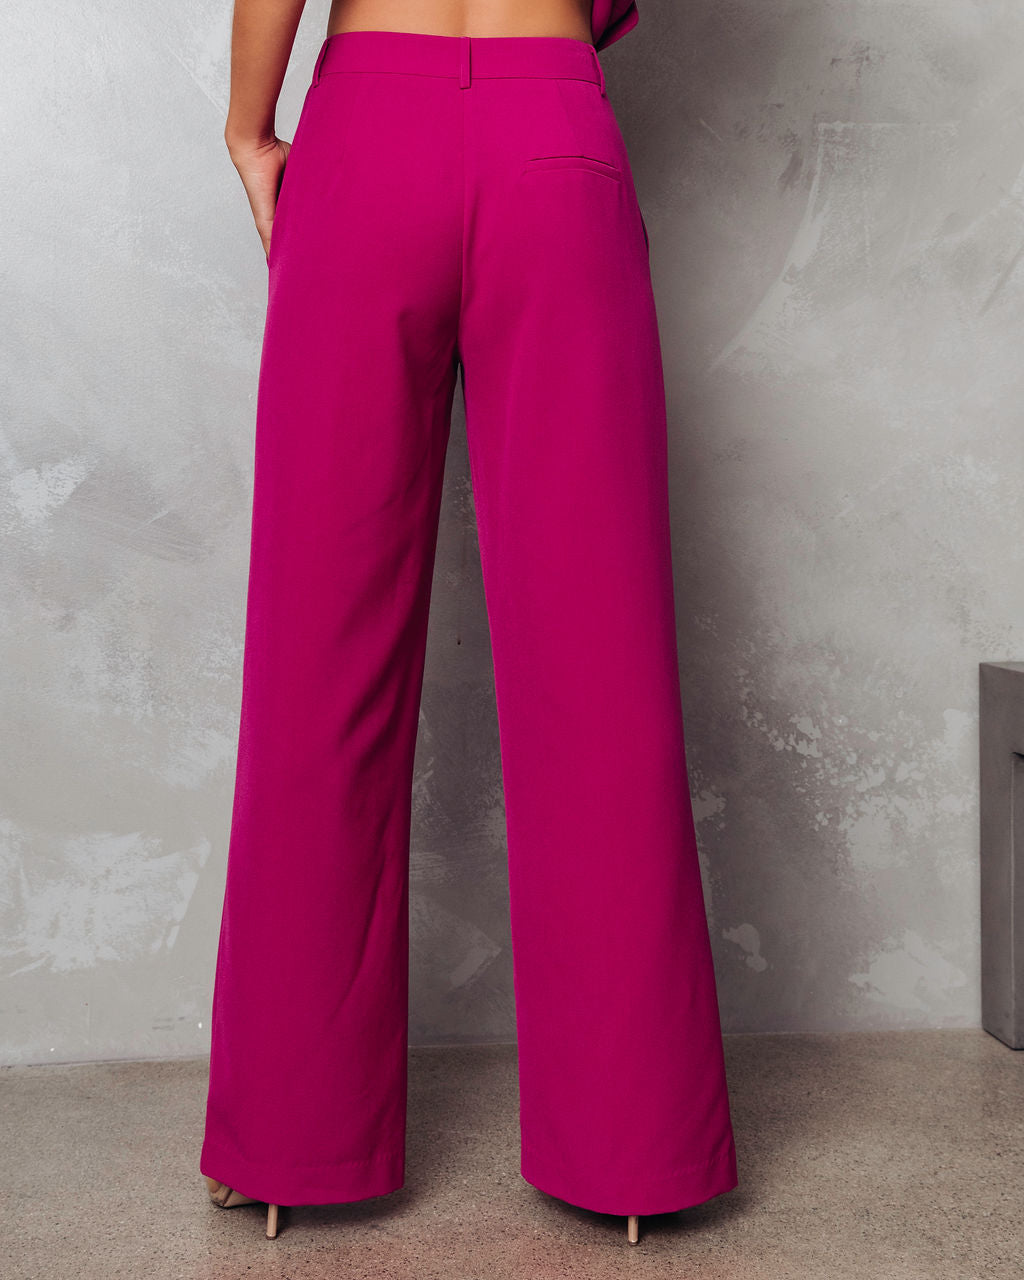 

Fashionista Confessions Pocketed Wide Leg Pants